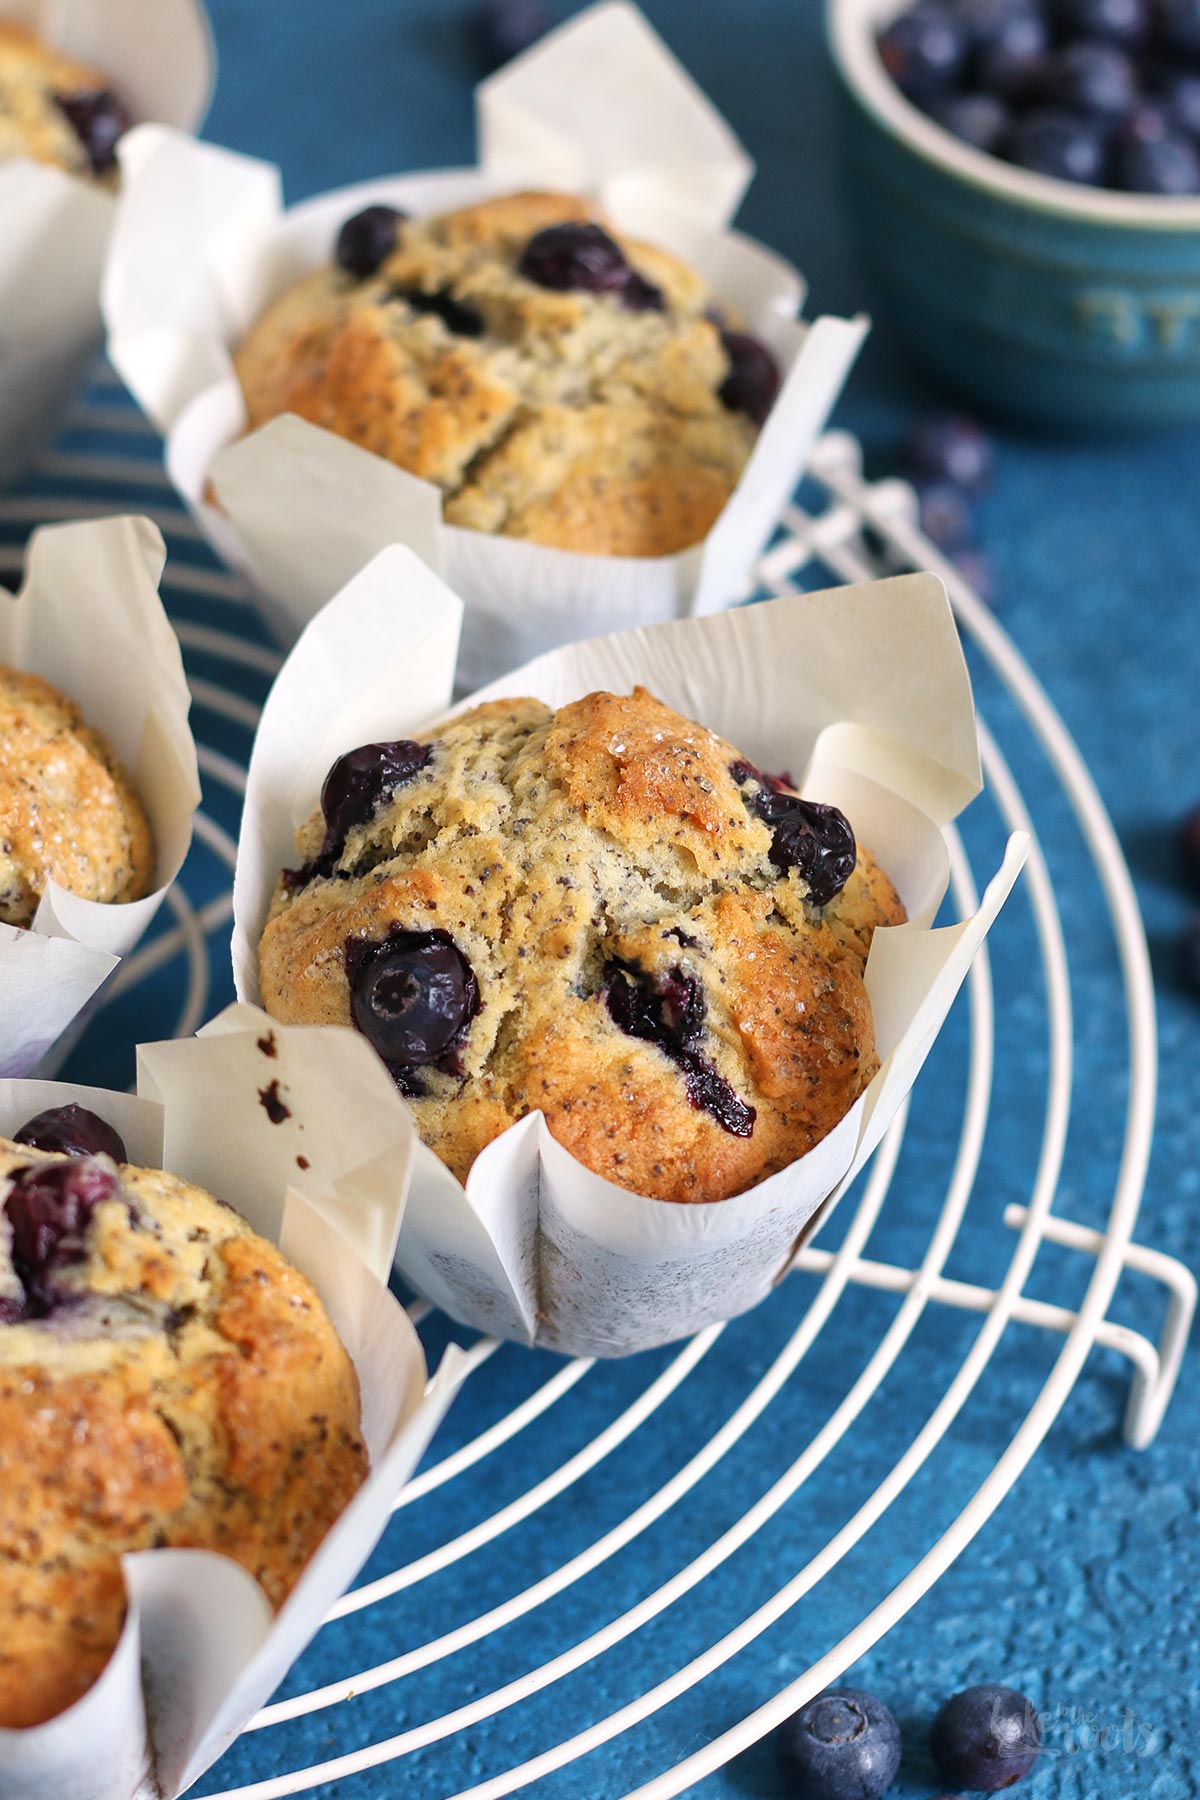 Jumbo Blueberry Lemon Poppy Seed Muffins | Bake to the roots